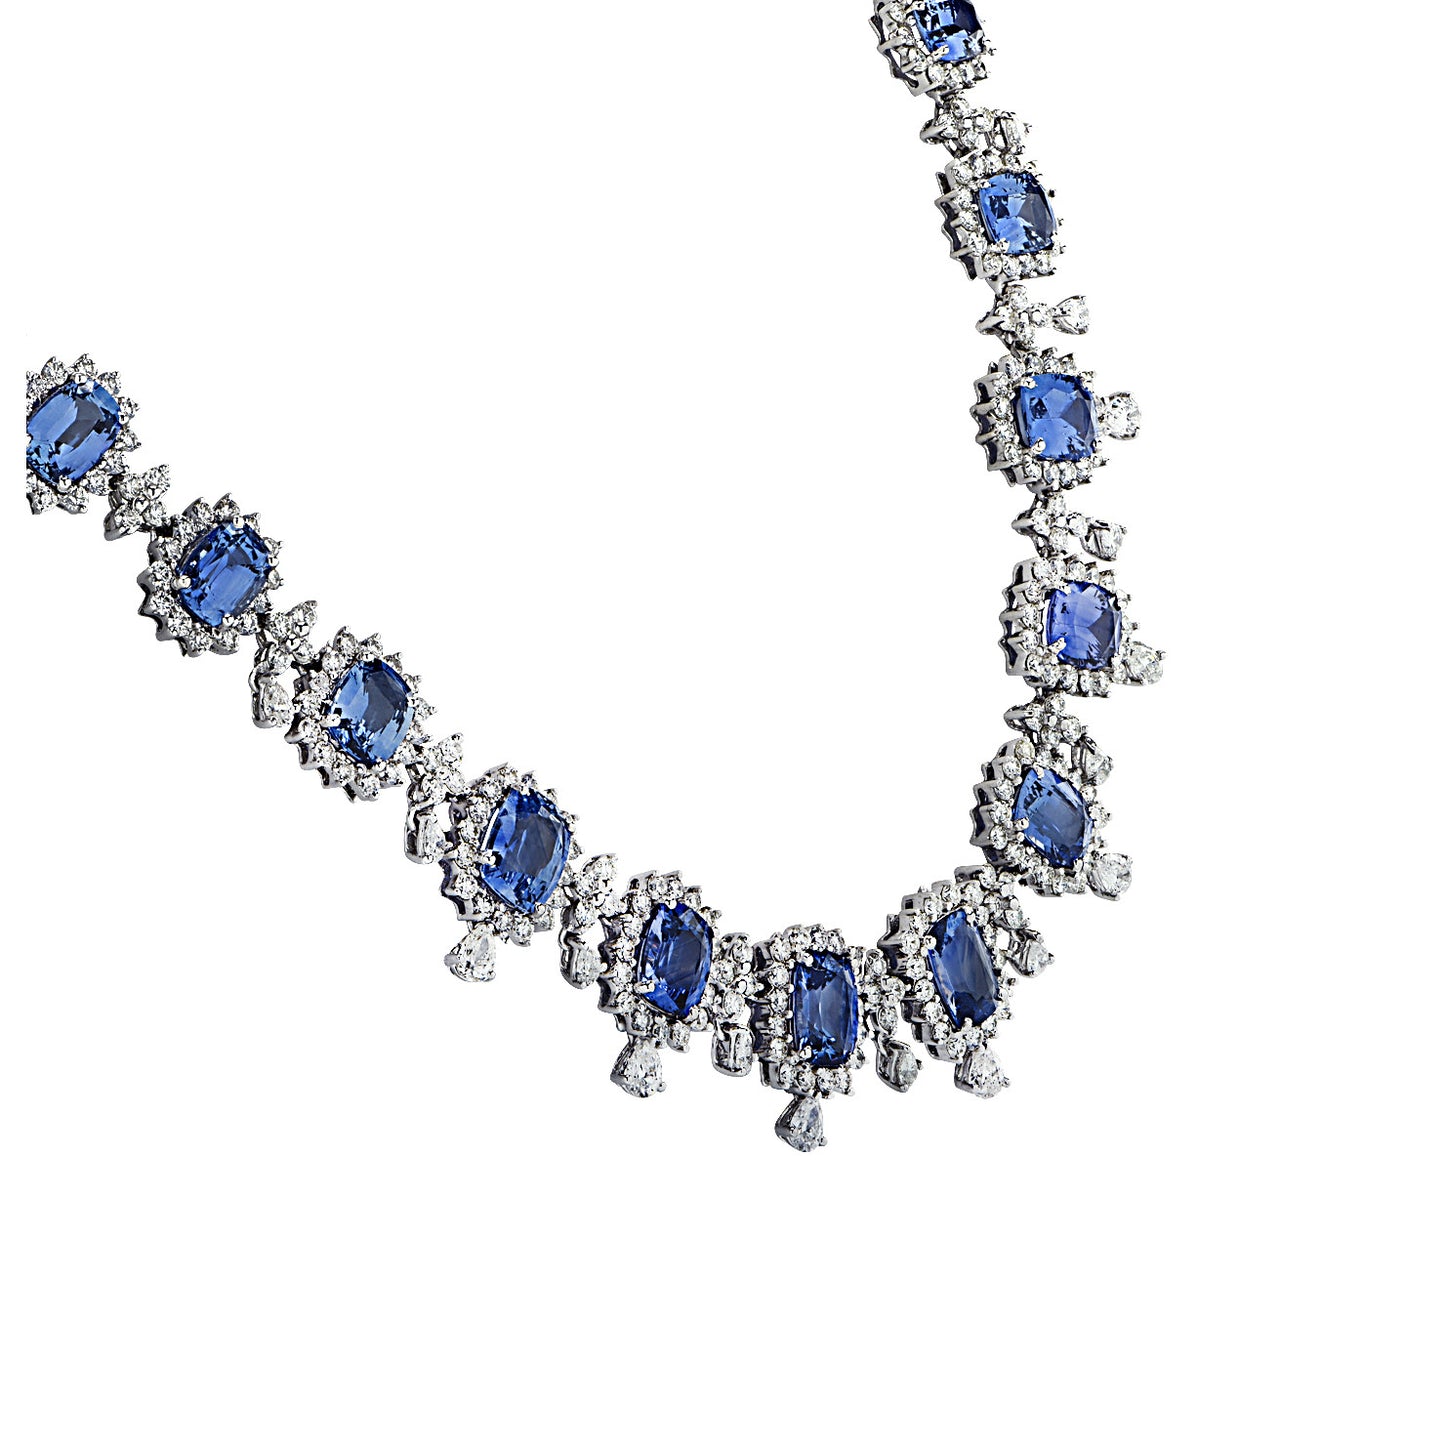 Post-1980s 18KT White Gold Sapphire & Diamond Necklace side